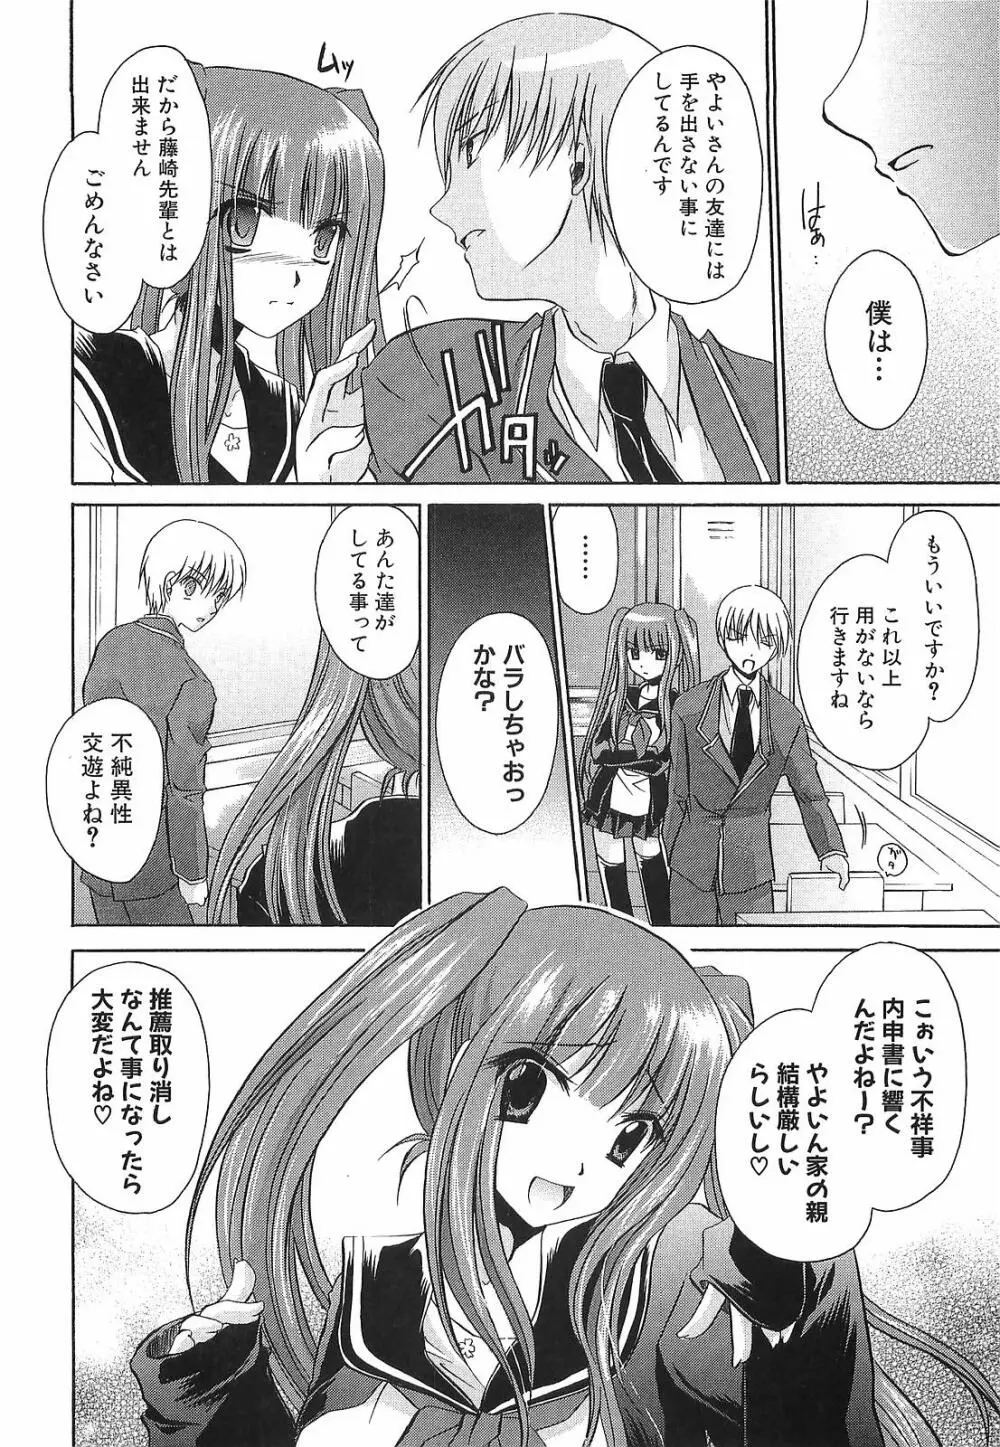 LOVE & HATE 3 FINAL～ENGAGE～通常版 Page.33